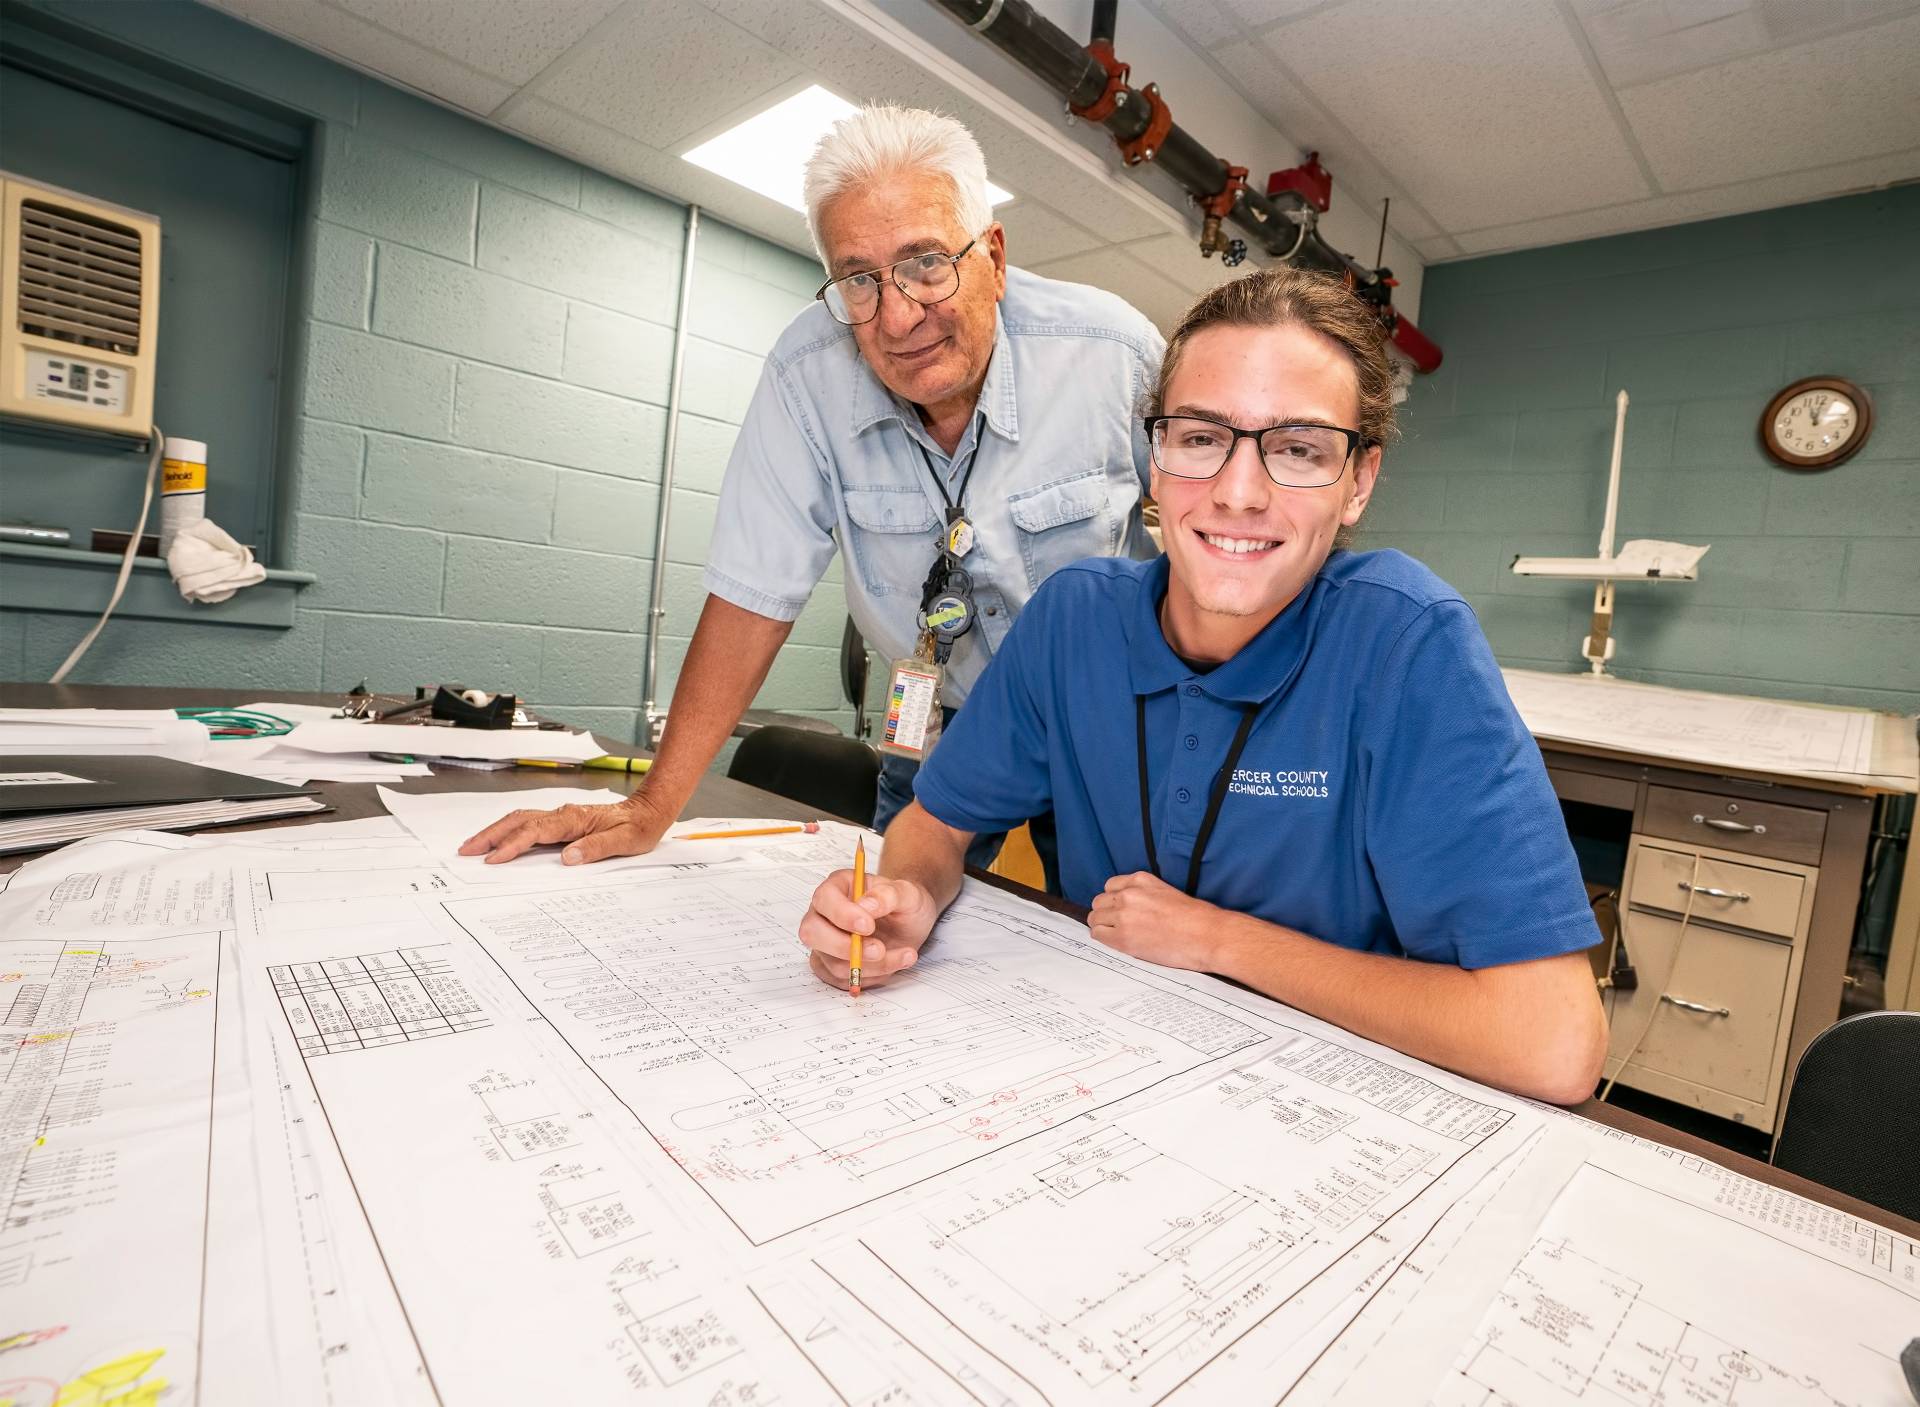 A technician and apprentice look over blueprint plans